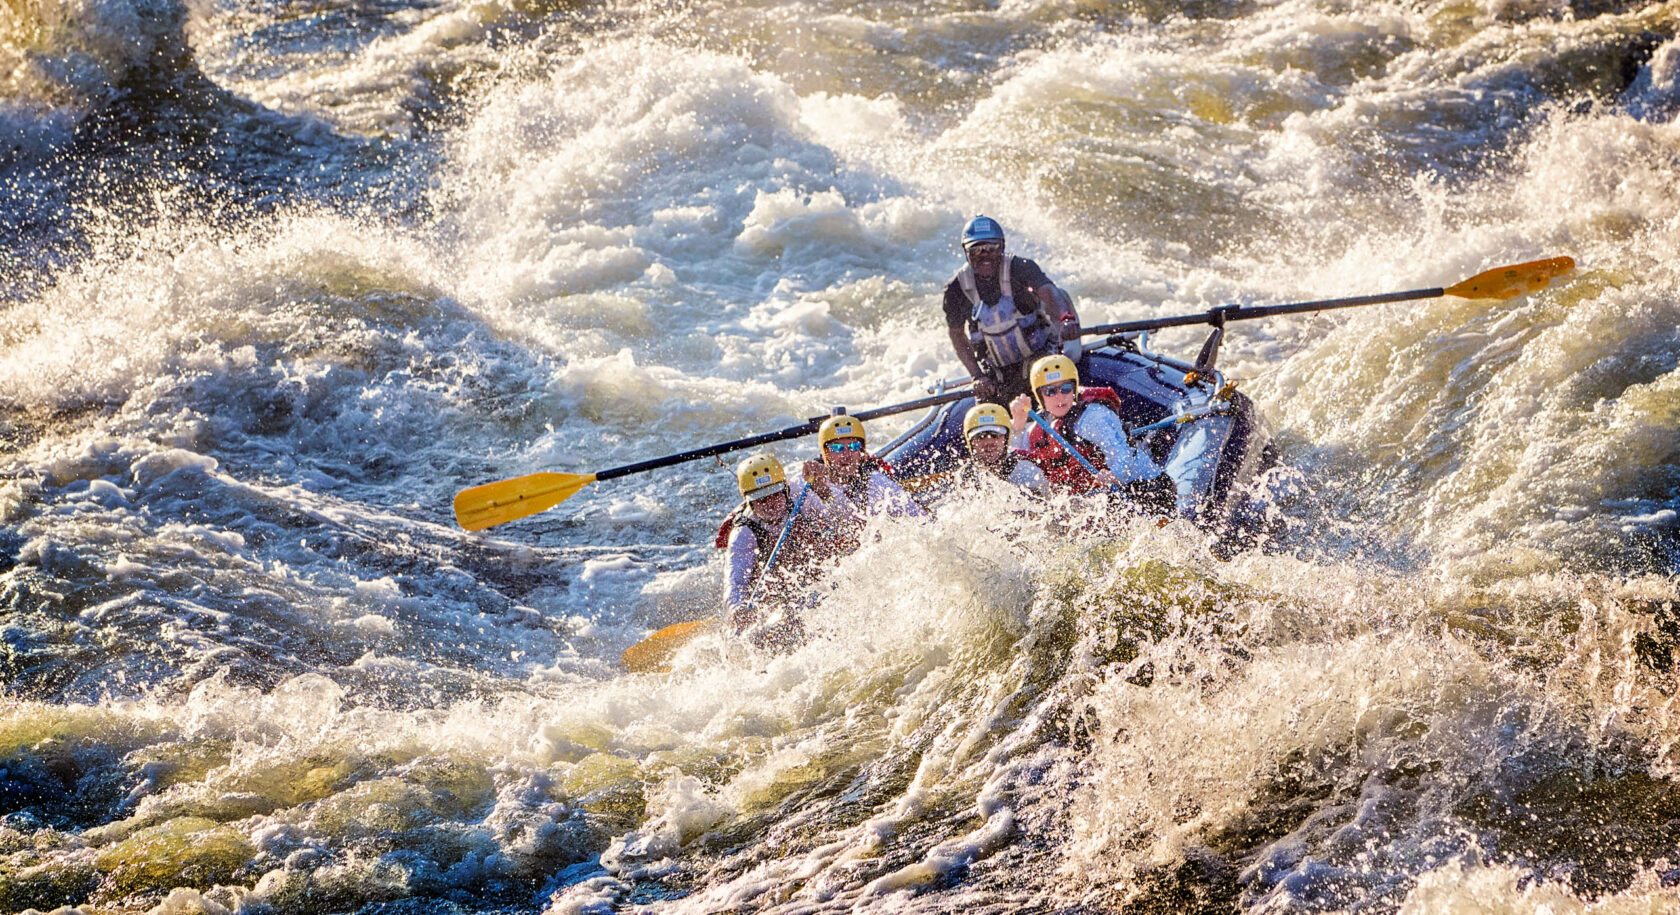 Rafters conquering some of the biggest commercially run whitewater in the world on the Zambezi River in Zambia.